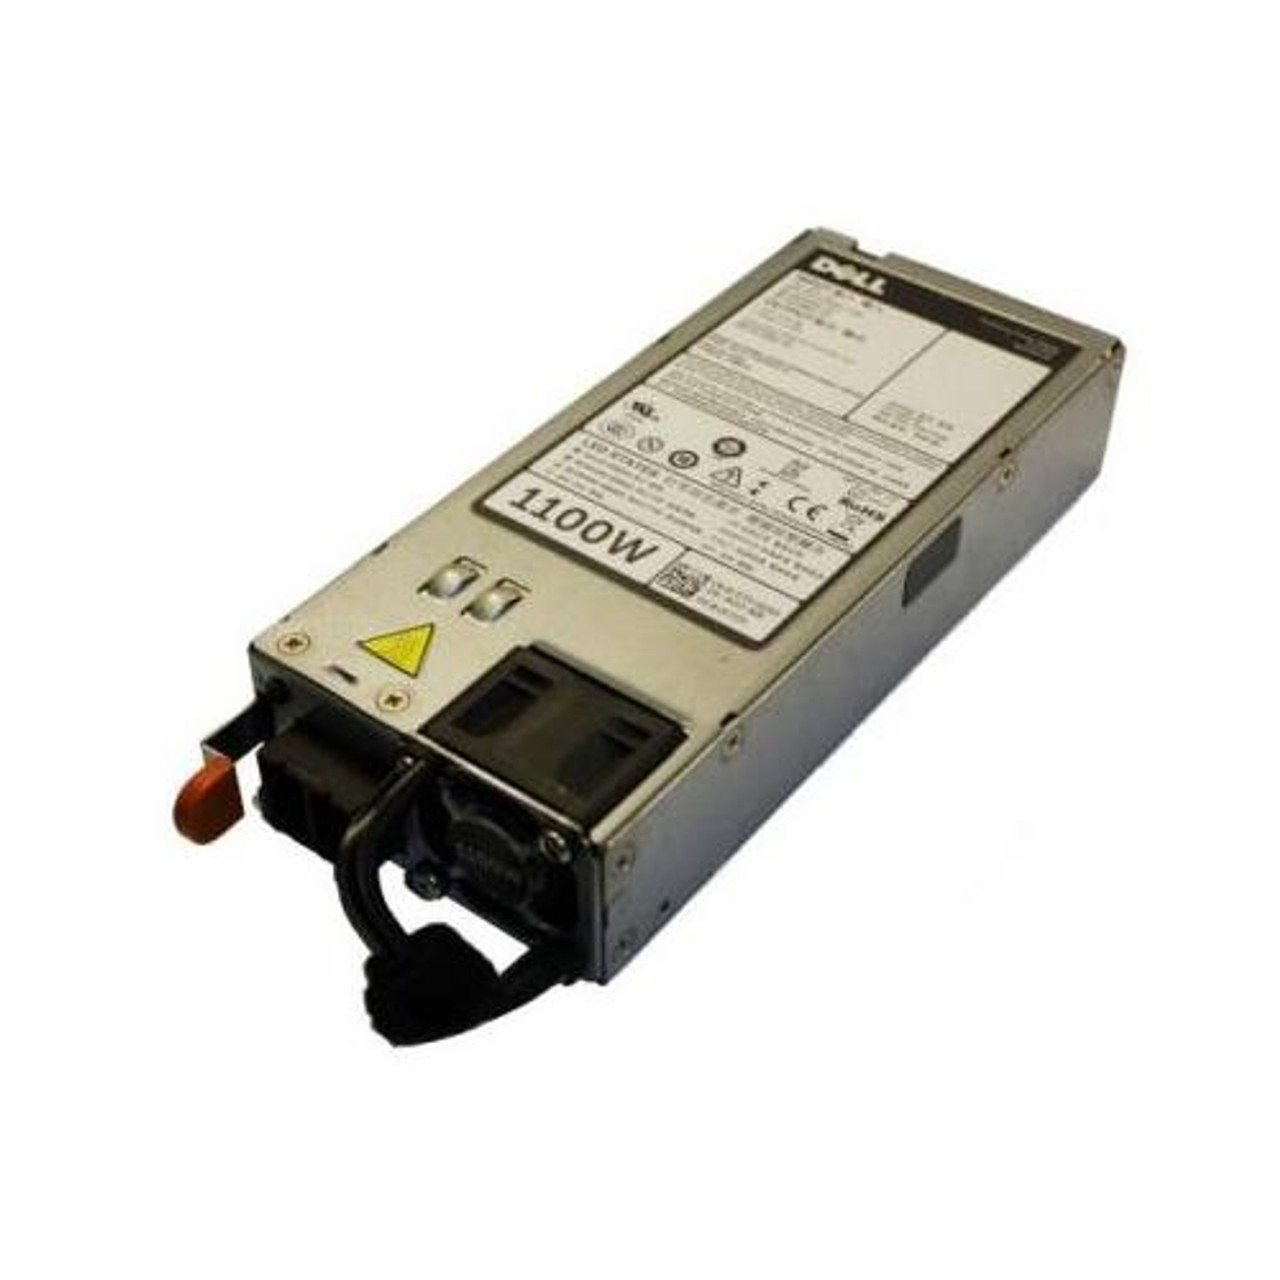 002RN7 Dell 1100-Watts Redundant Hot Swappable Power Supply for PowerEdge R520 R620 R720 R720XD R820 T420 T620 and